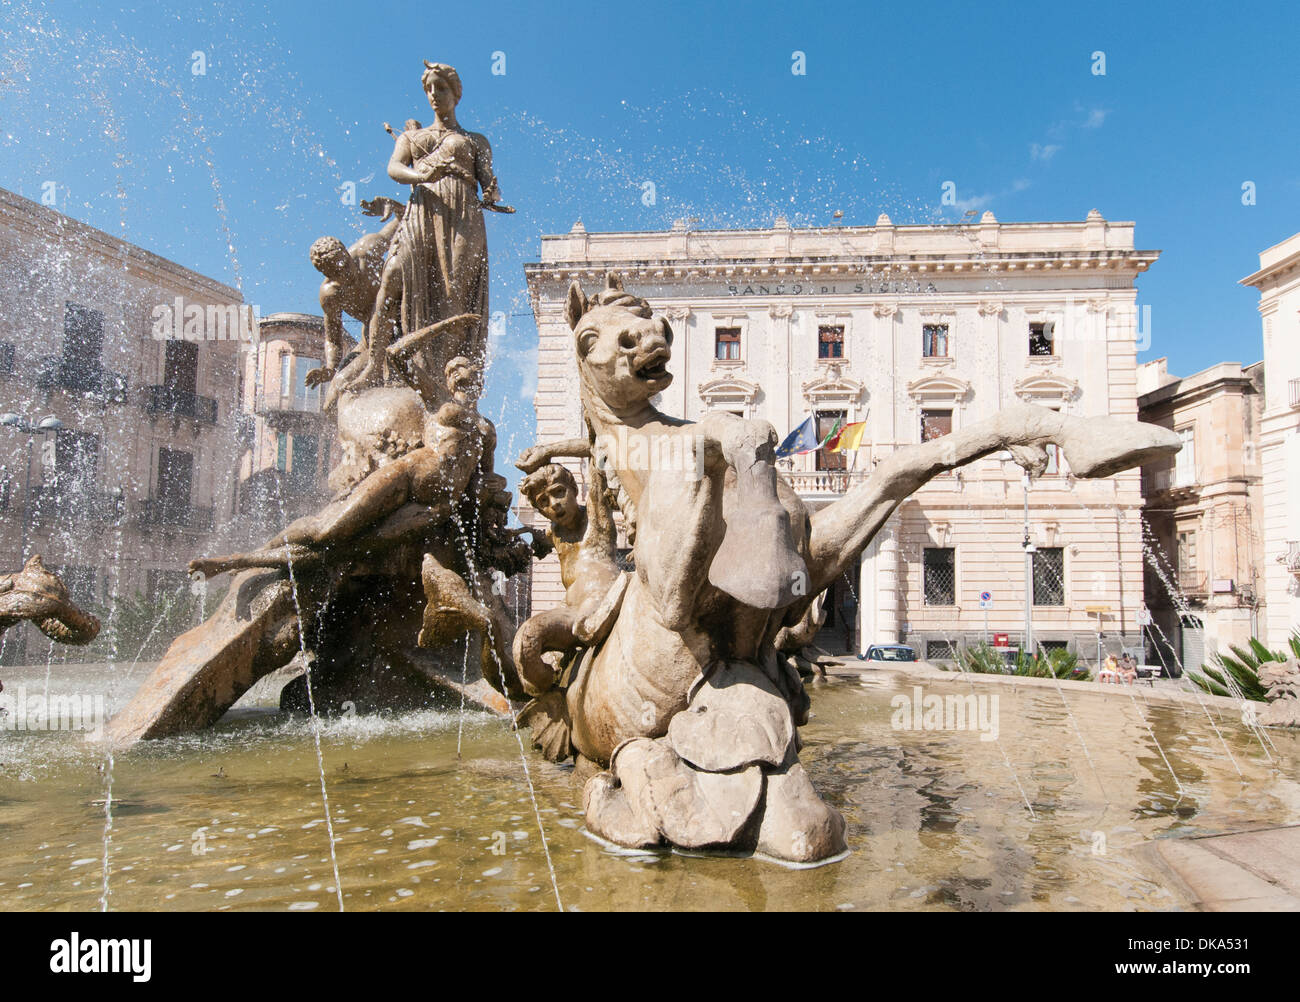 The fountain of Diana, Piazza Archimede in the UNESCO World Heritage site of  Ortygia, Syracuse, Italy Stock Photo